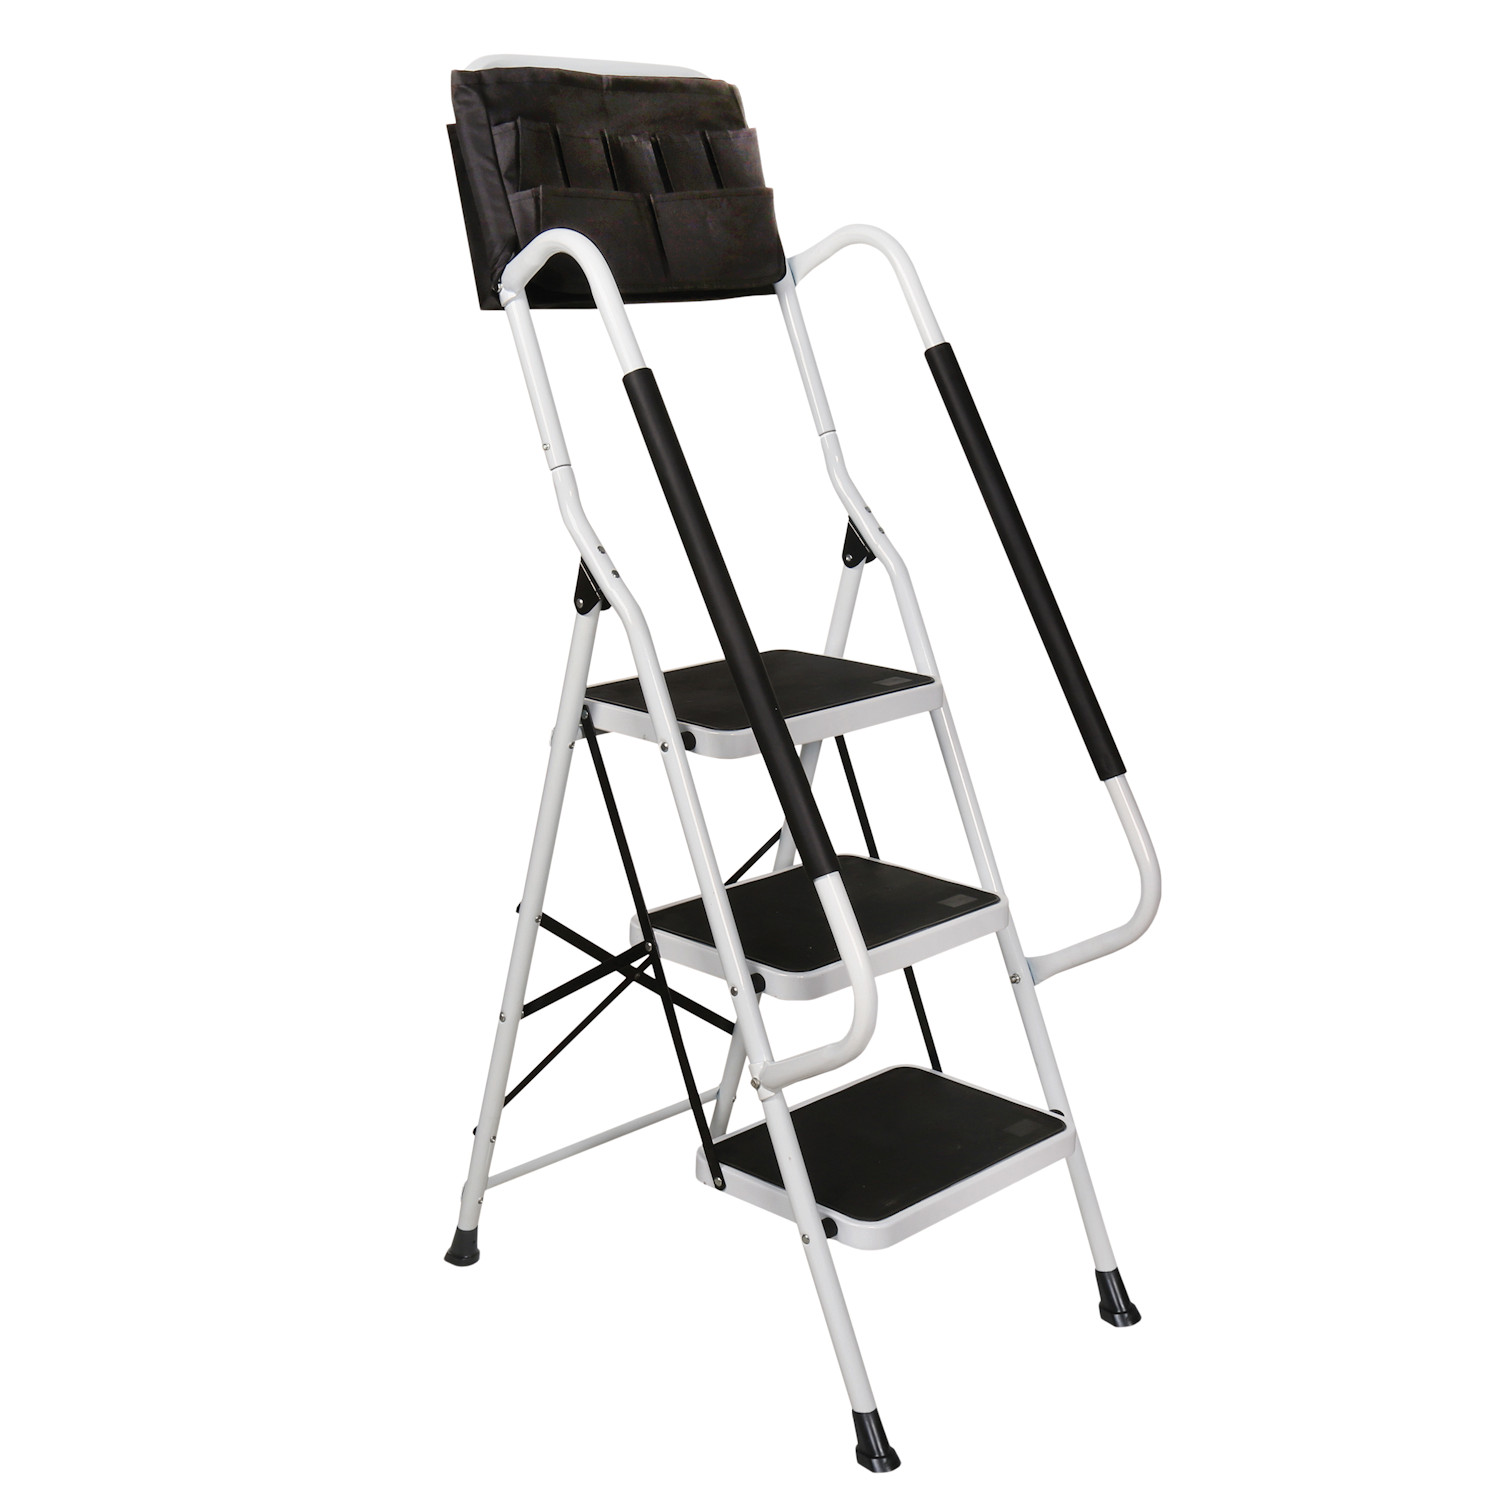 Details about   Home Use 3-Step Ladder Folding Non-Slip Safety Tread Short Handrail Iron Ladder 